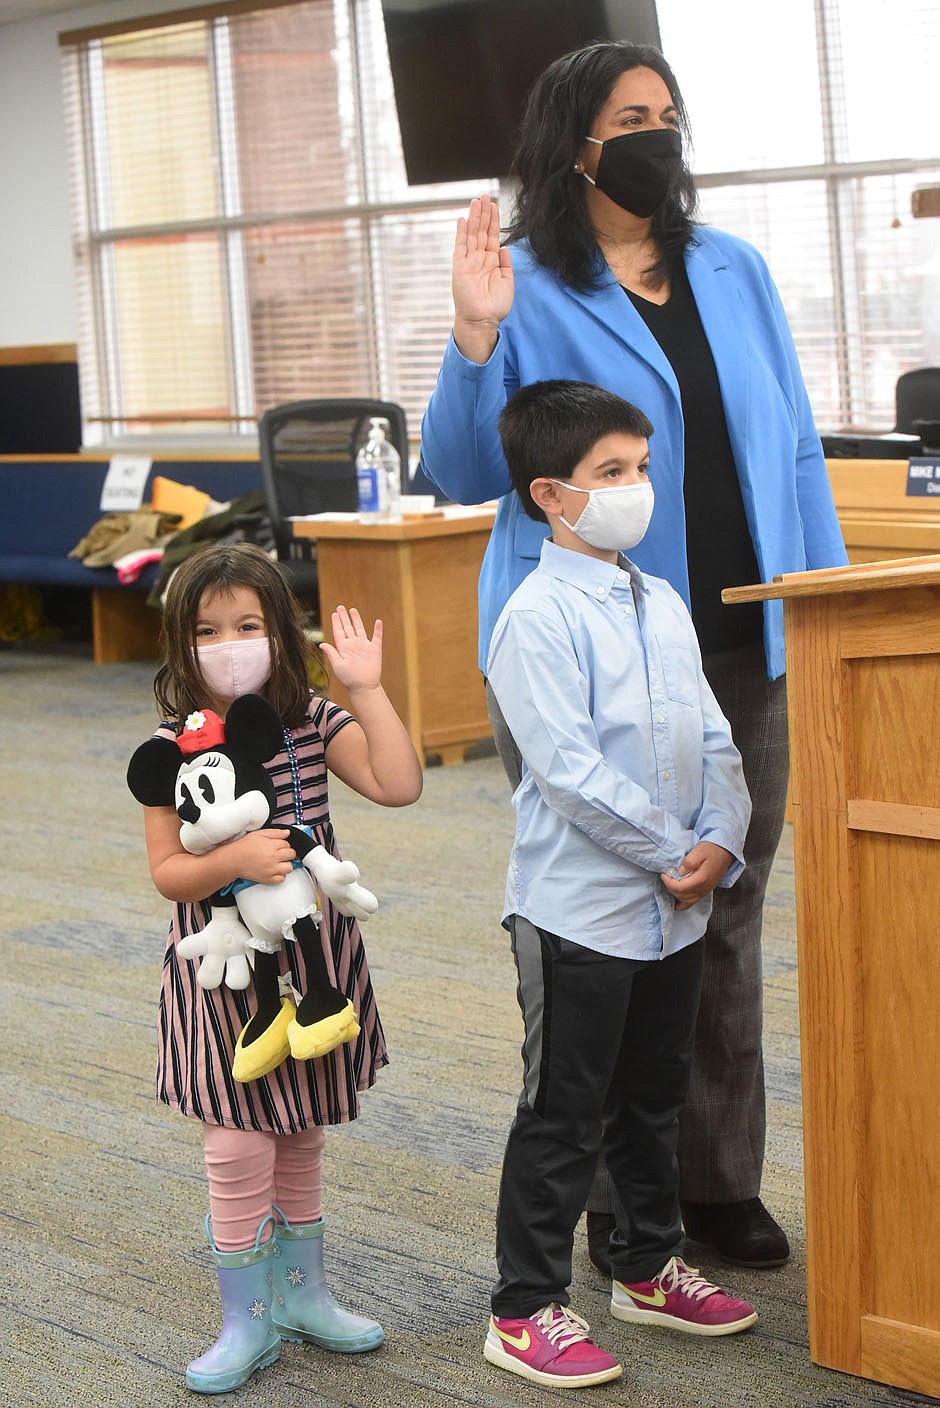 LIKE DAUGHTER LIKE MOM
Gayatri Agnew is sworn in on Friday Jan. 1 2021, New Year's Day, as a member of the Bentonville city council while her daughter, Kamala, 4, raises her right hand as well. Agnew's son, Rohan, 6, also stood with his mom. Benton County Clerk Betsy Harrell swore in Bentonville council members at the county administration building.
(NWA Democrat-Gazette/Flip Putthoff)